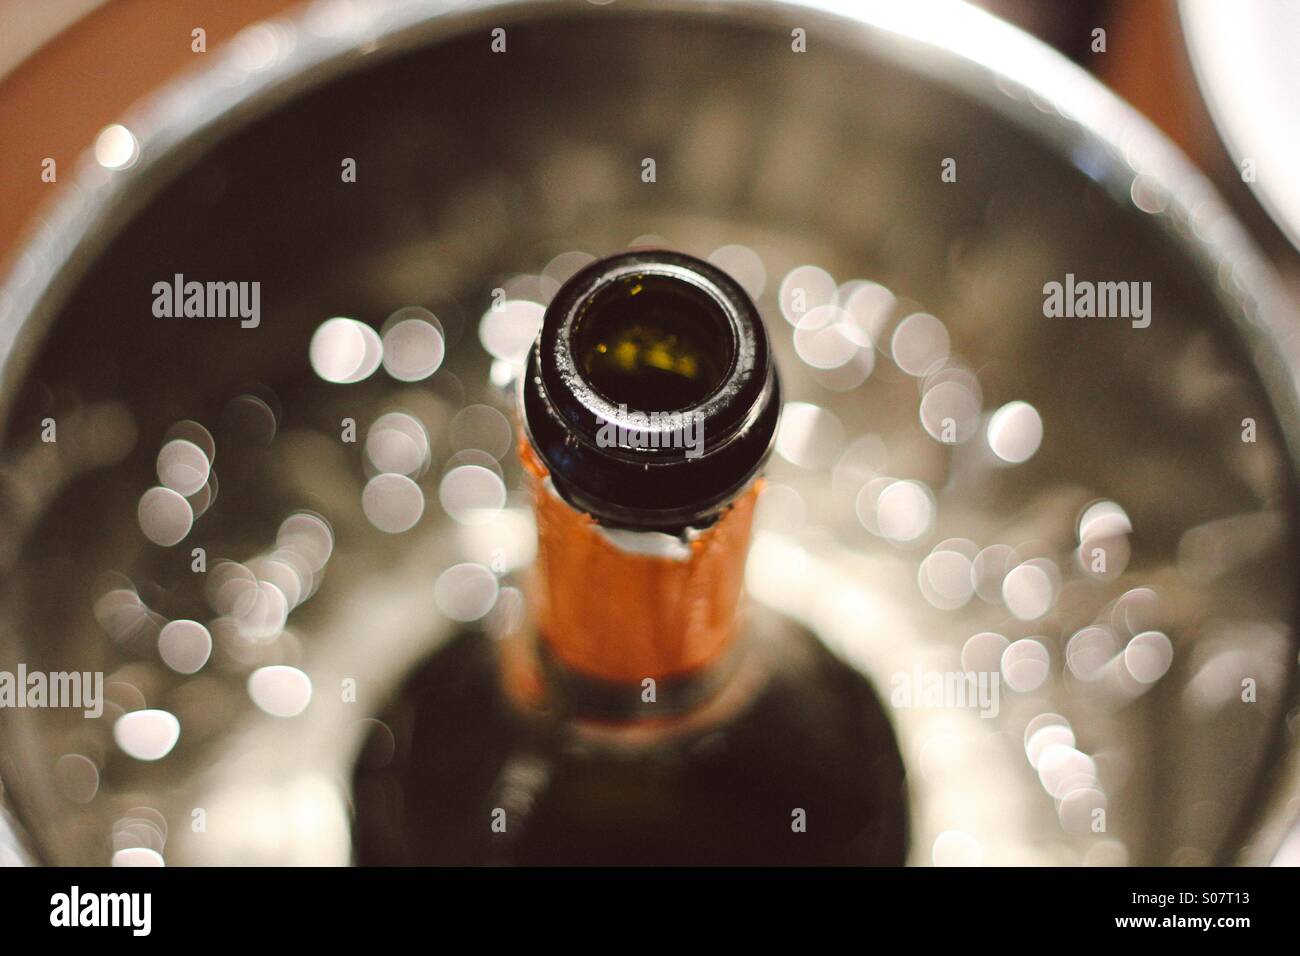 A bottle of champagne on ice Stock Photo